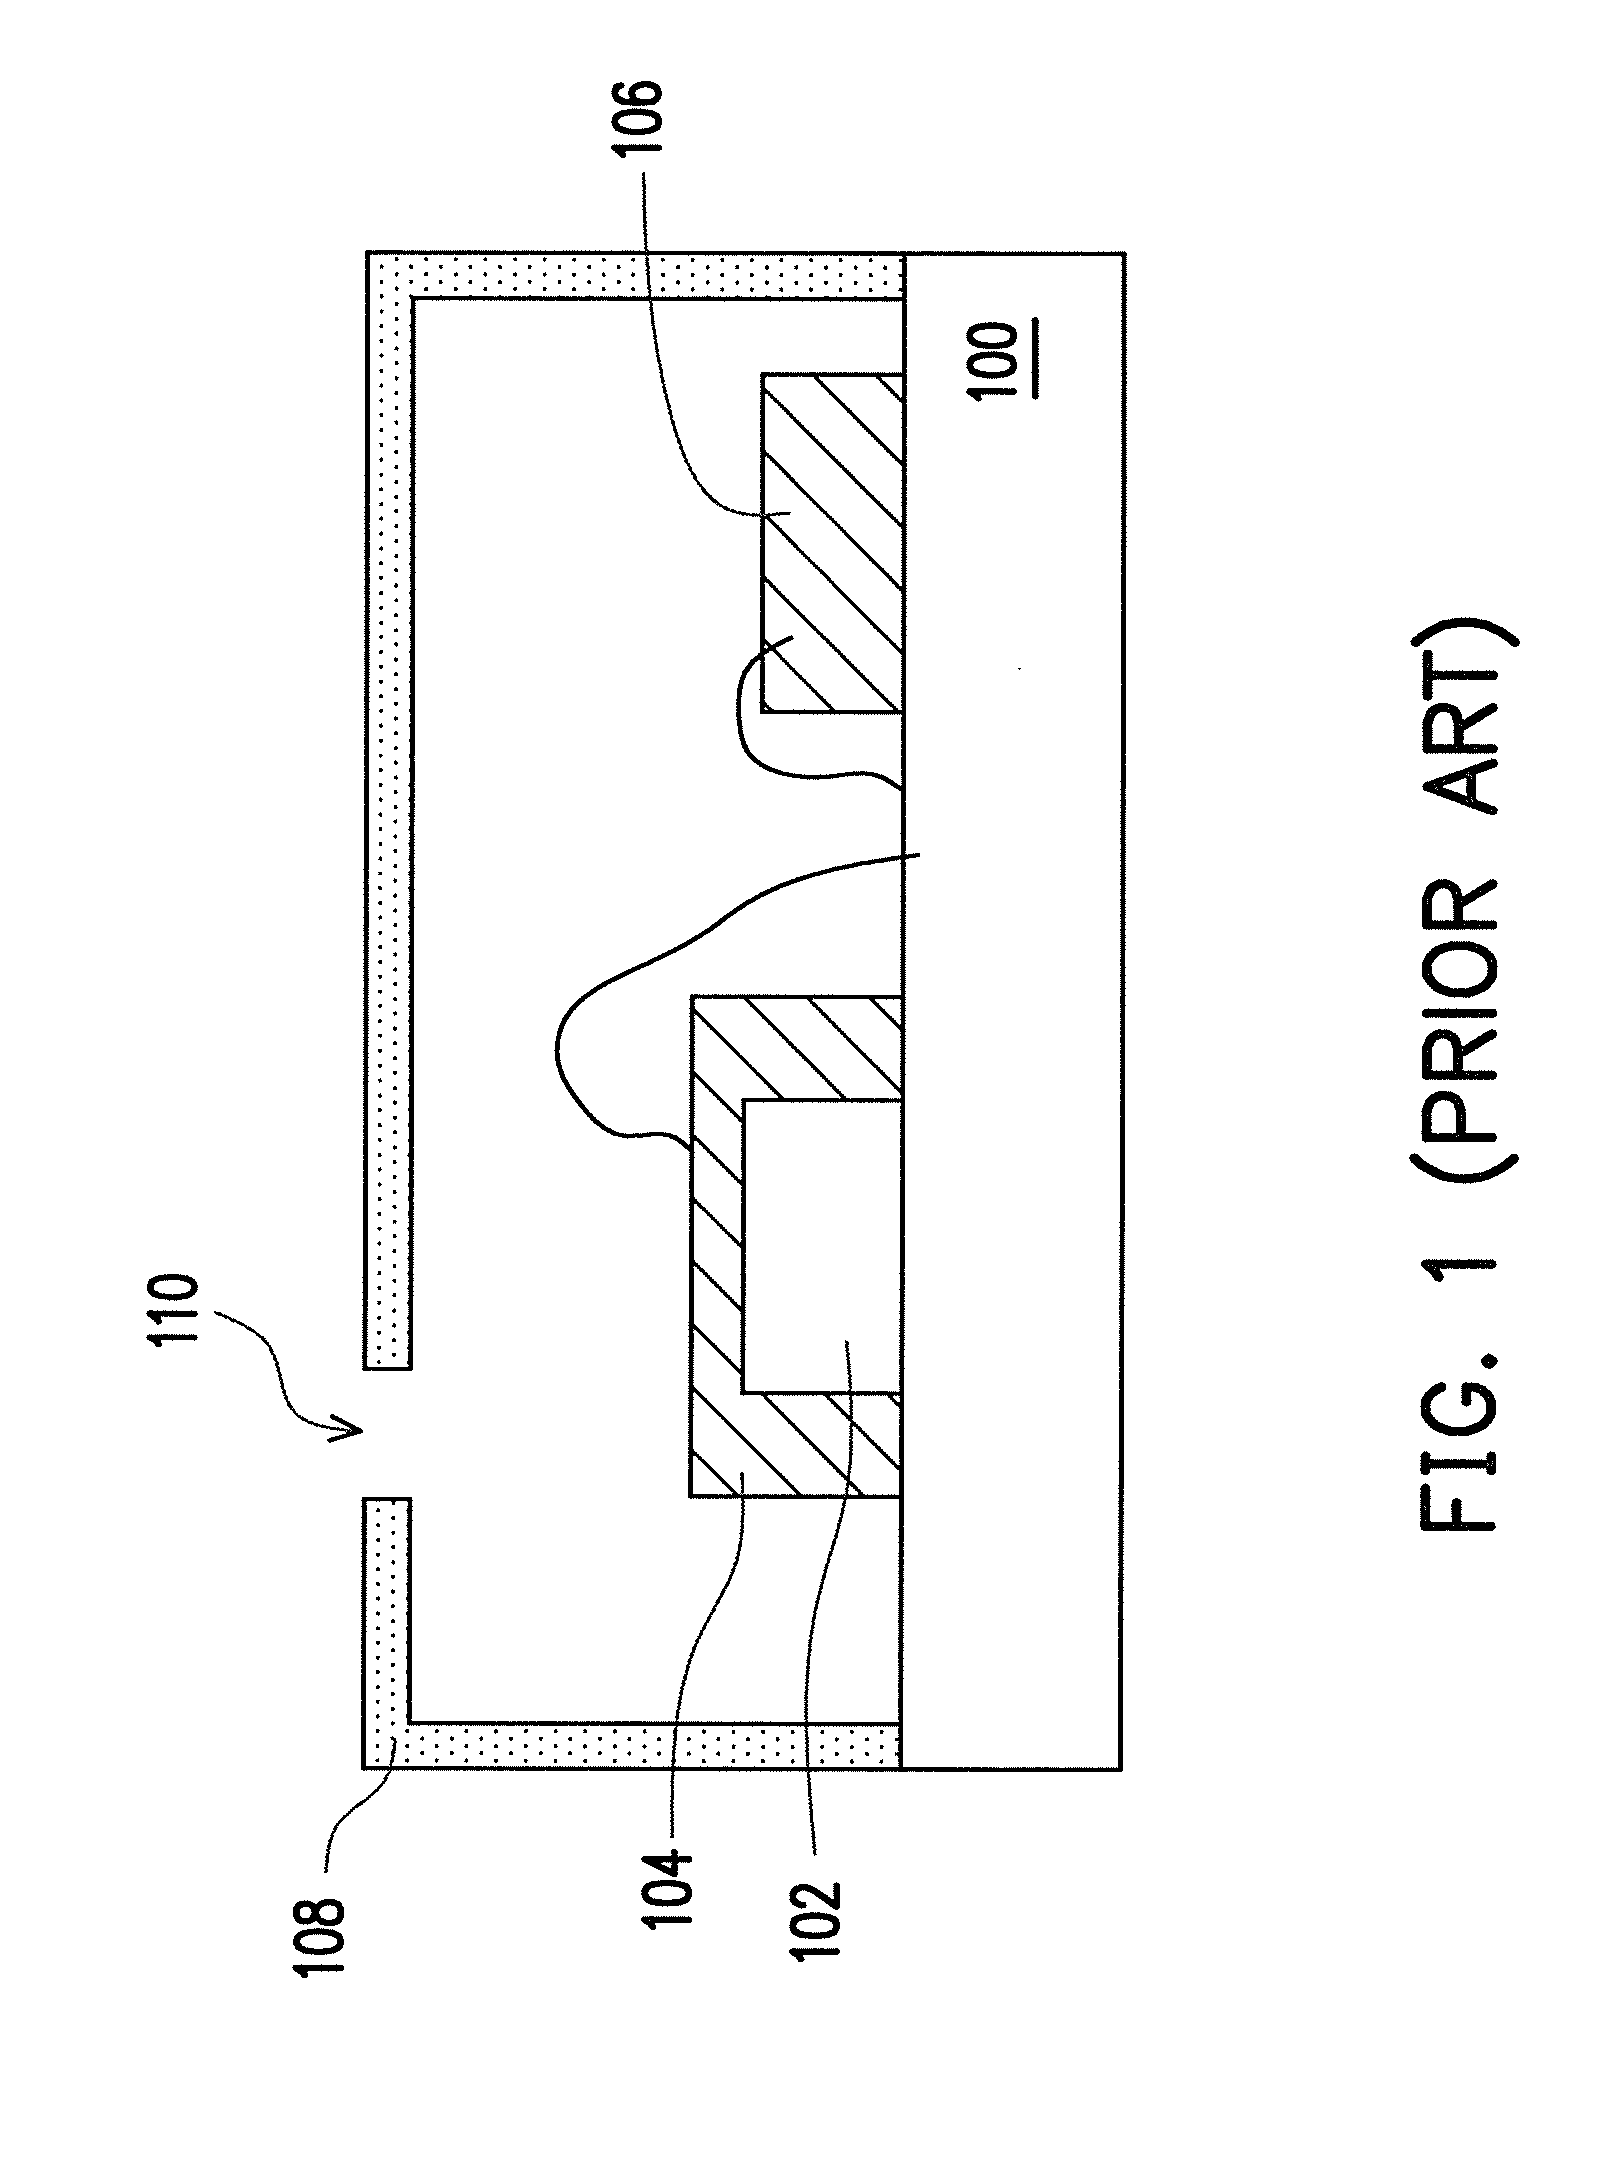 Micro-electro-mechanical systems (MEMS) package and method for forming the MEMS package